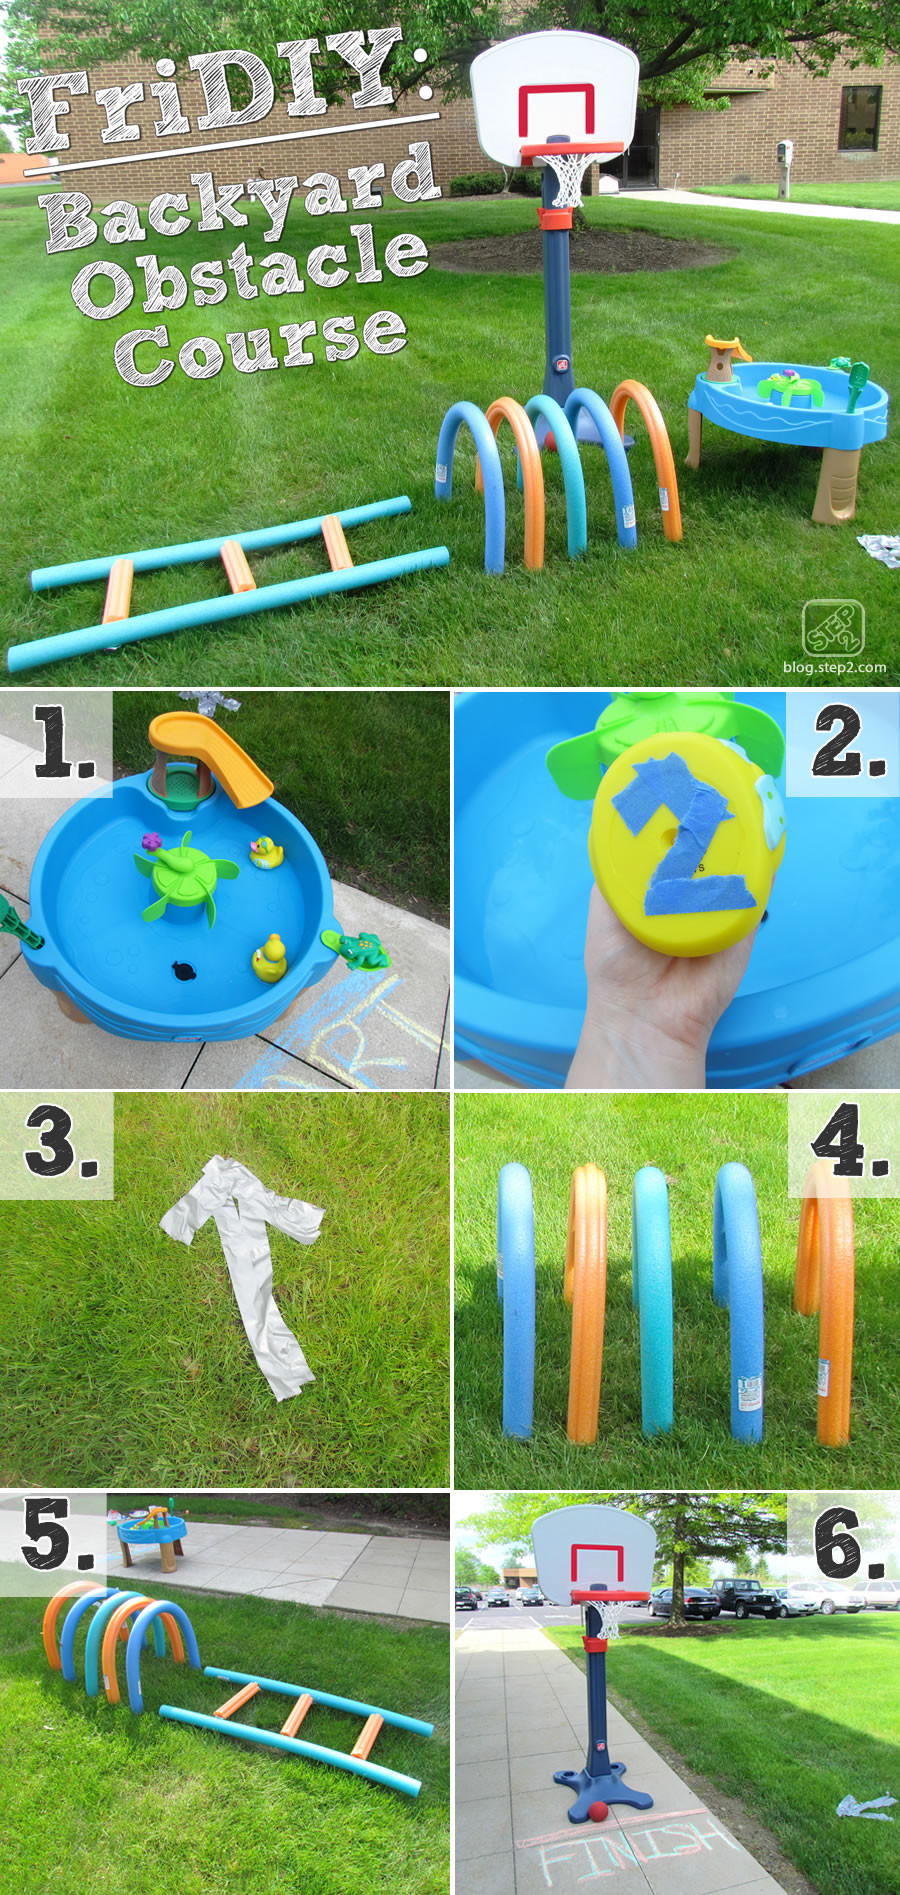 DIY Obstacle Course For Kids
 Backyard Fun Archives Step2 Blog